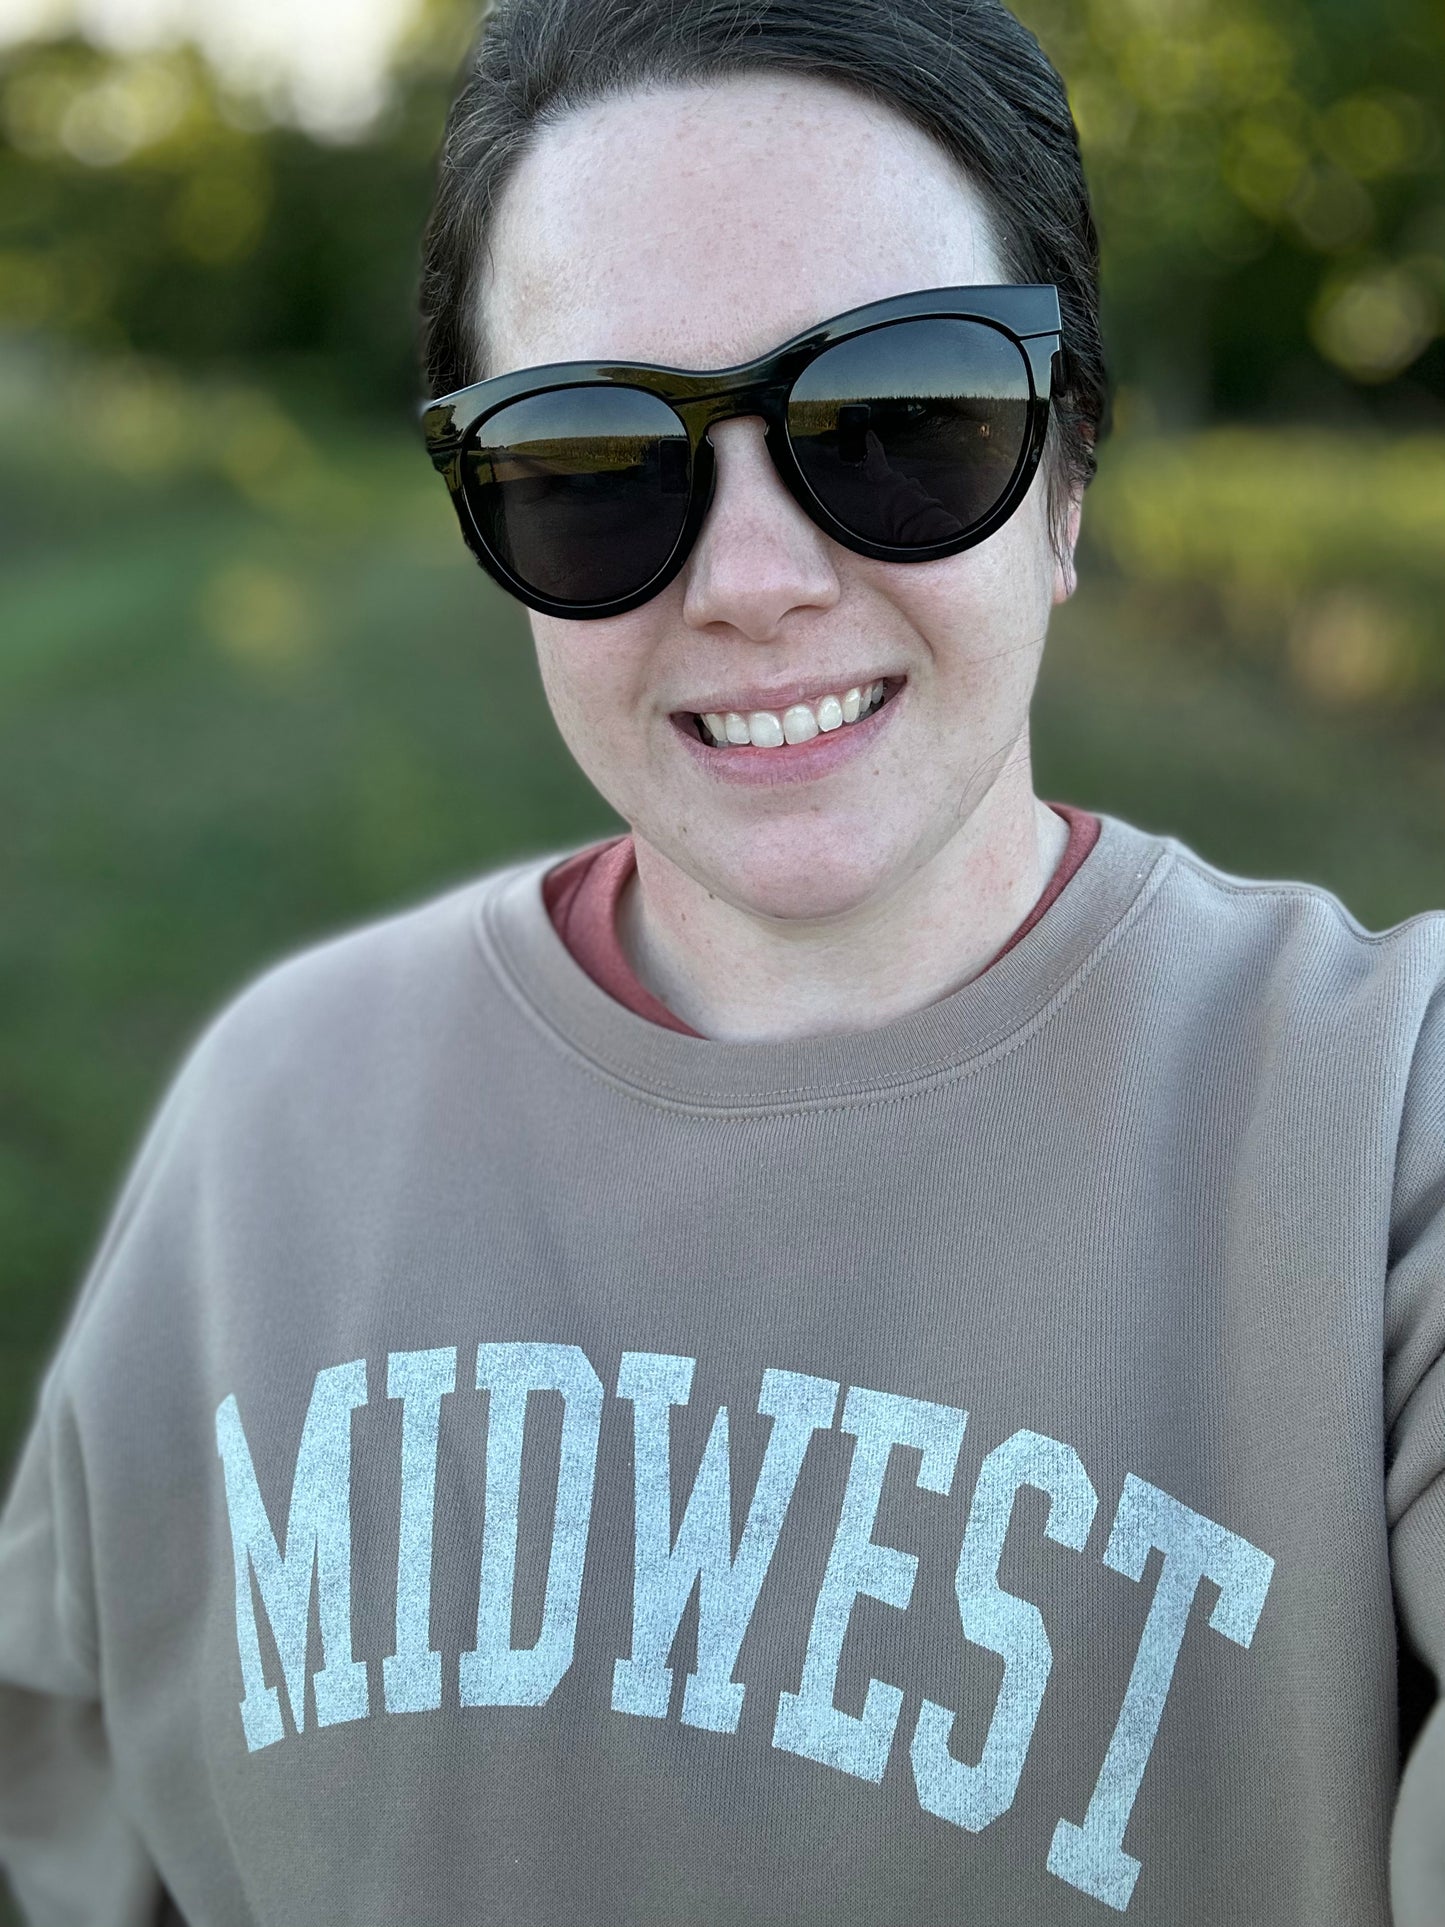 "MIDWEST" Mid-length Graphic Sweatshirt